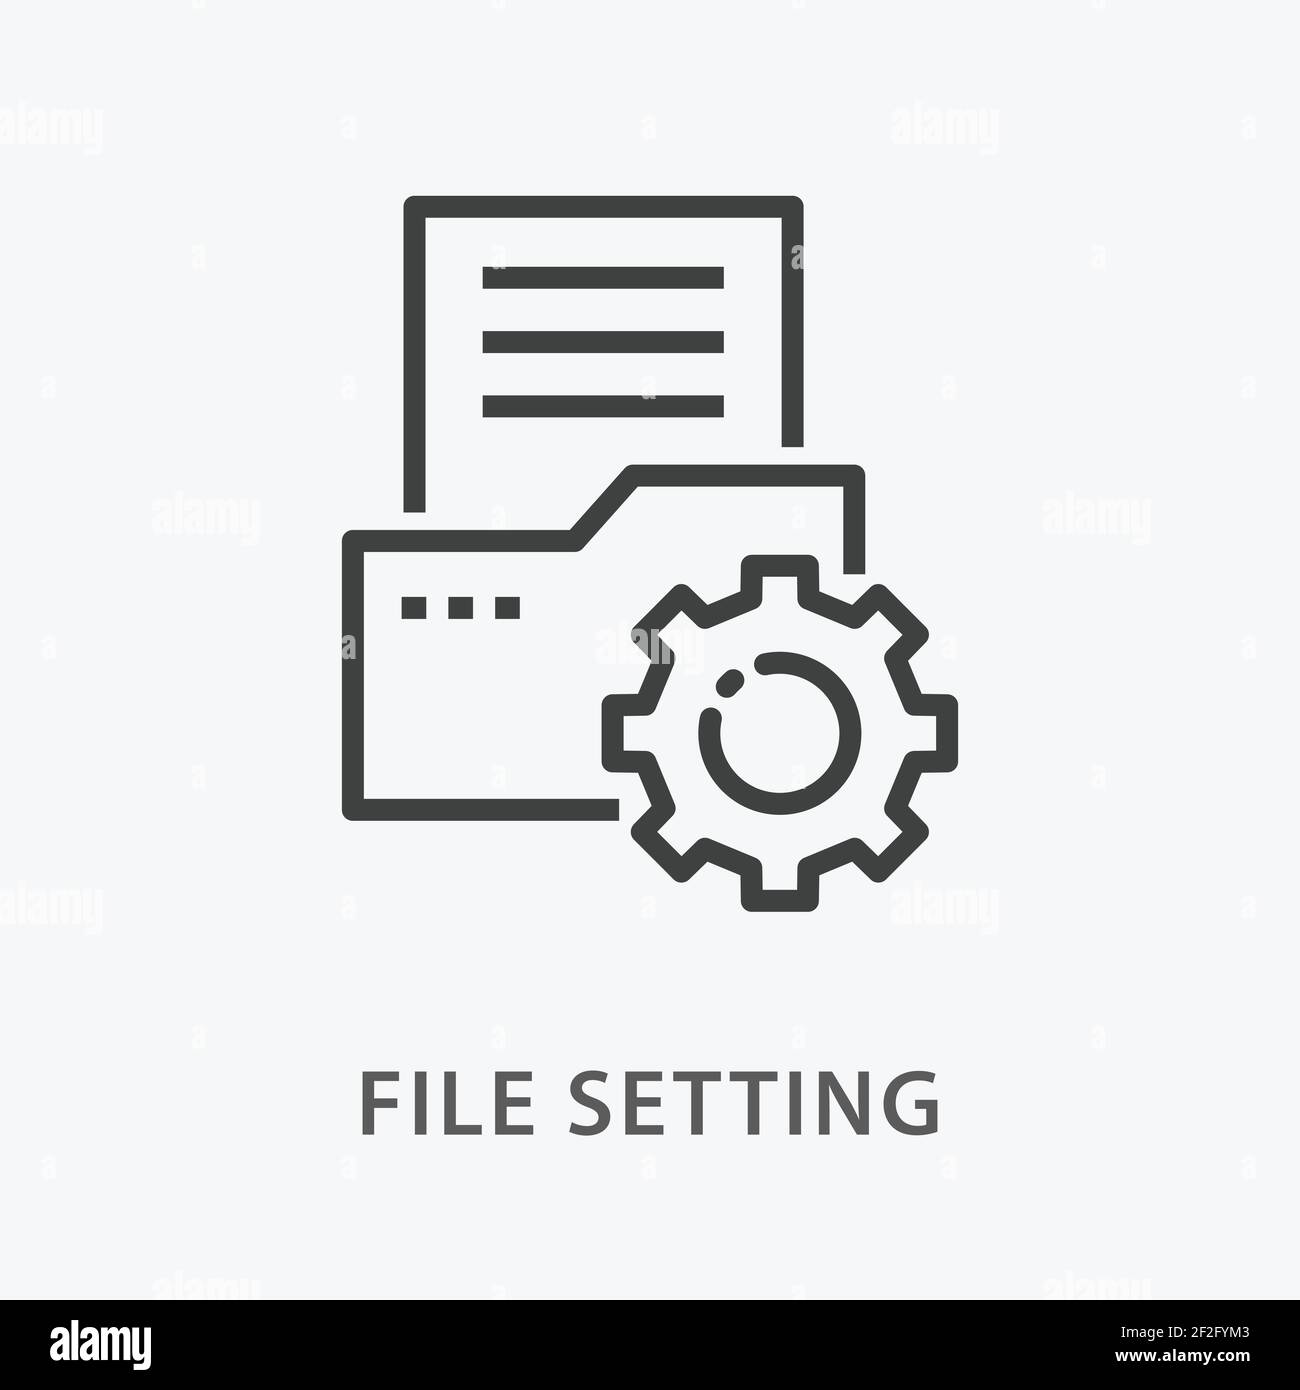 File setting line icon on white background. Stock Vector